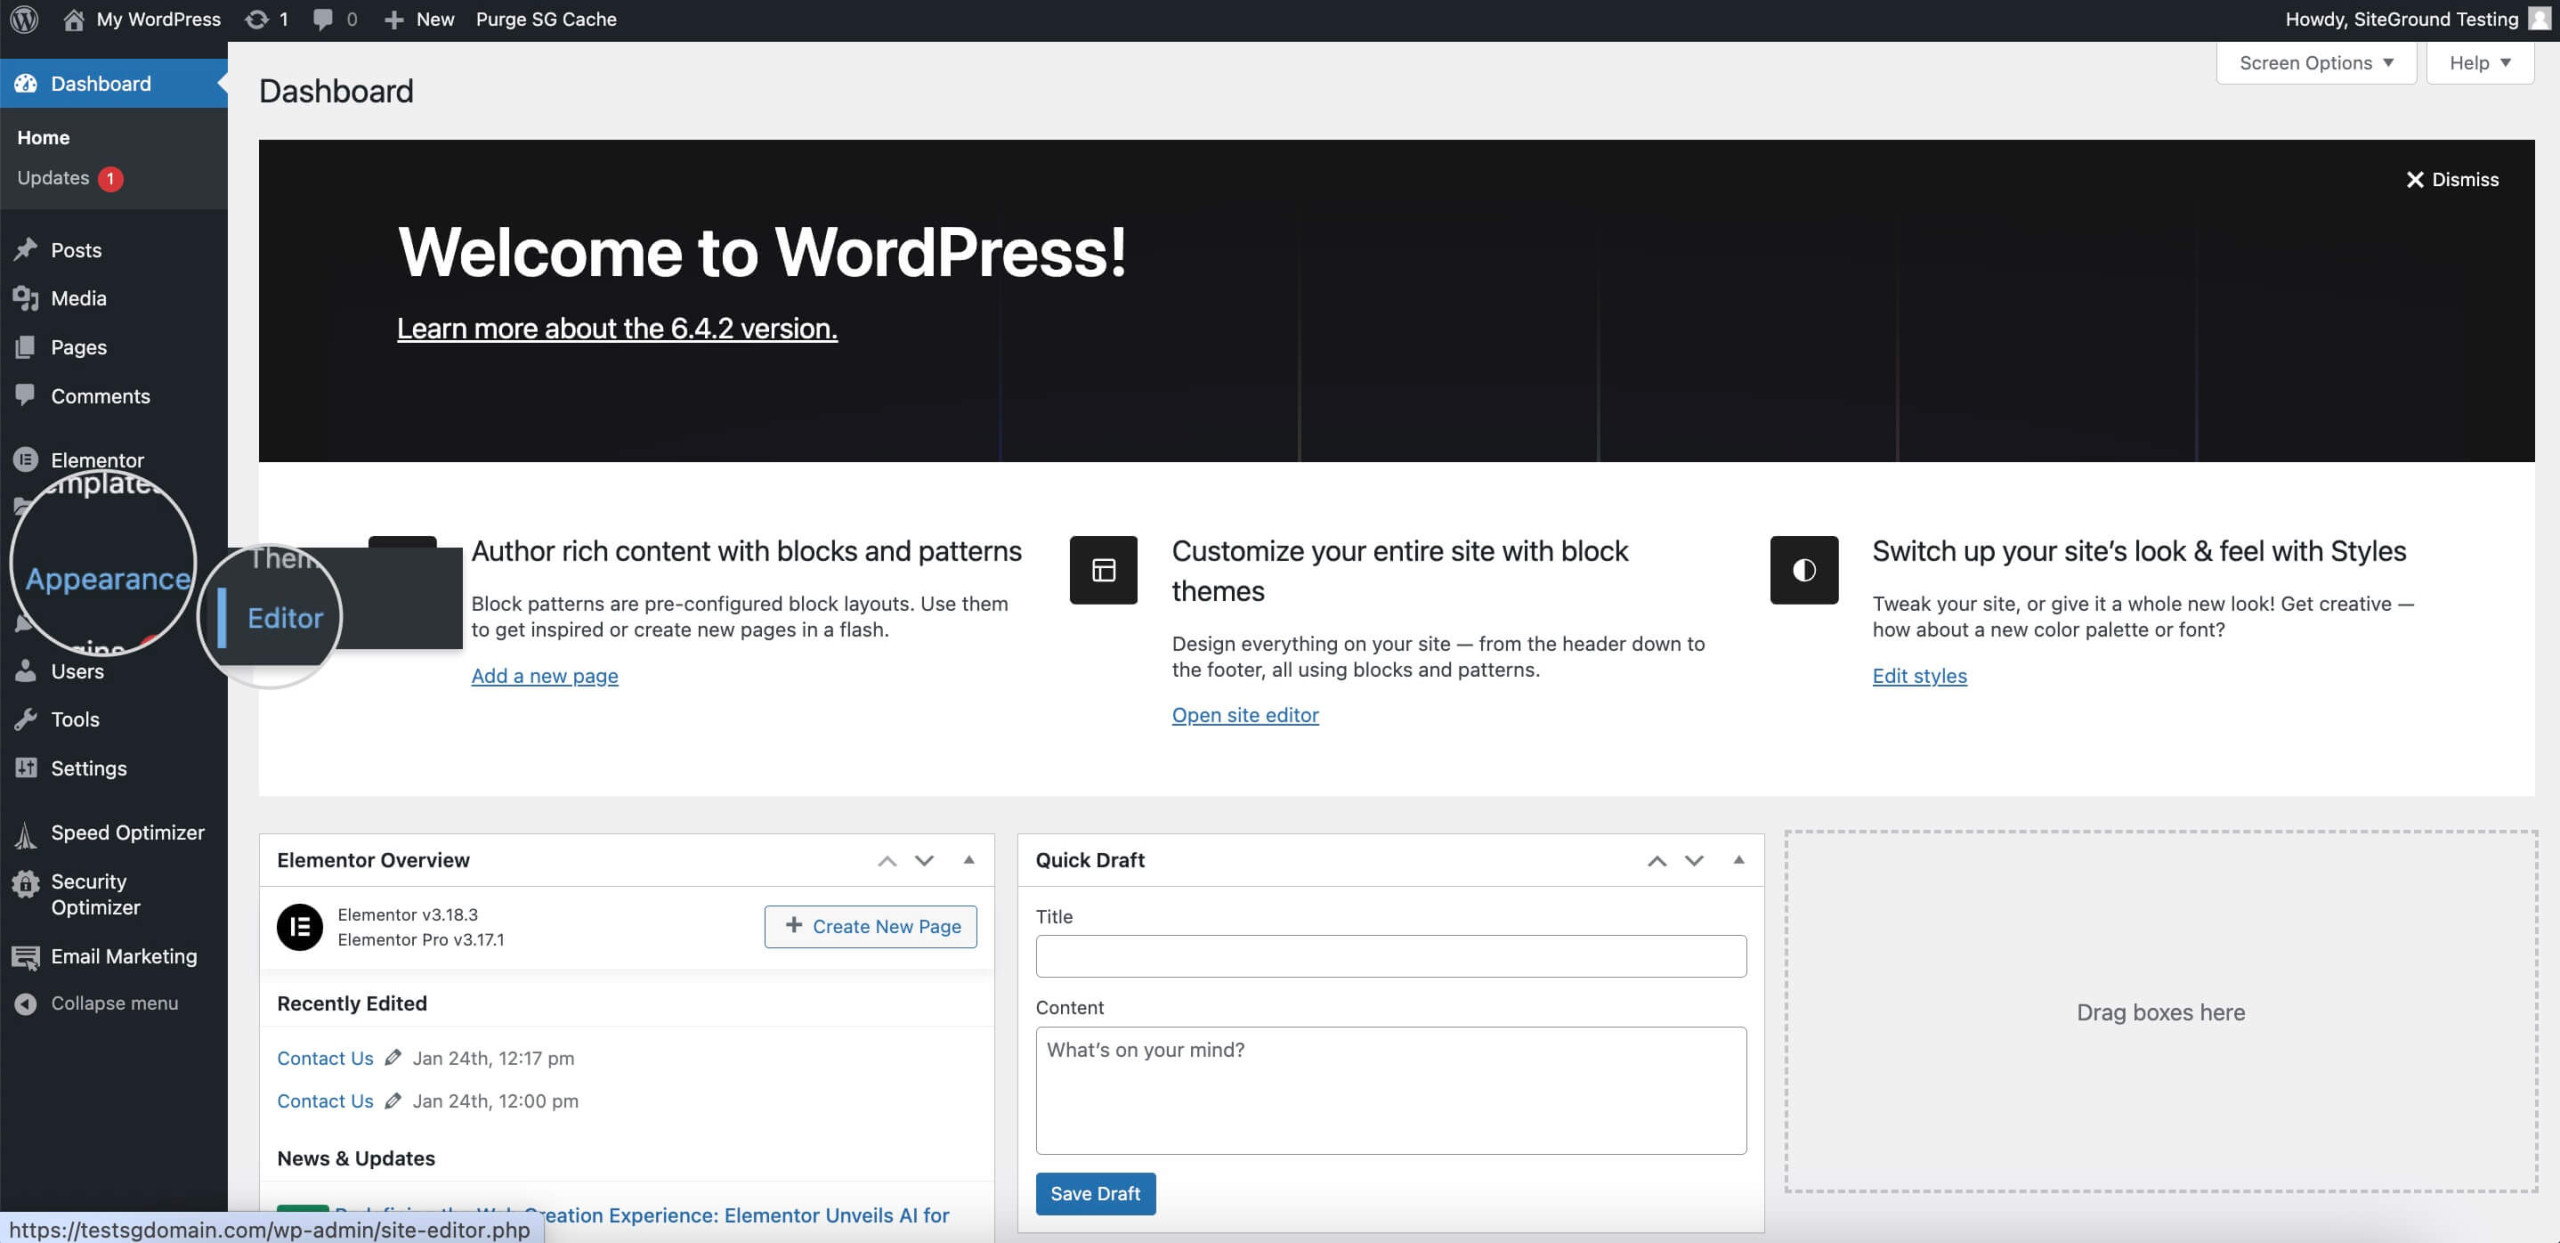 Screenshot showing how to access the WordPress Full Site Editor